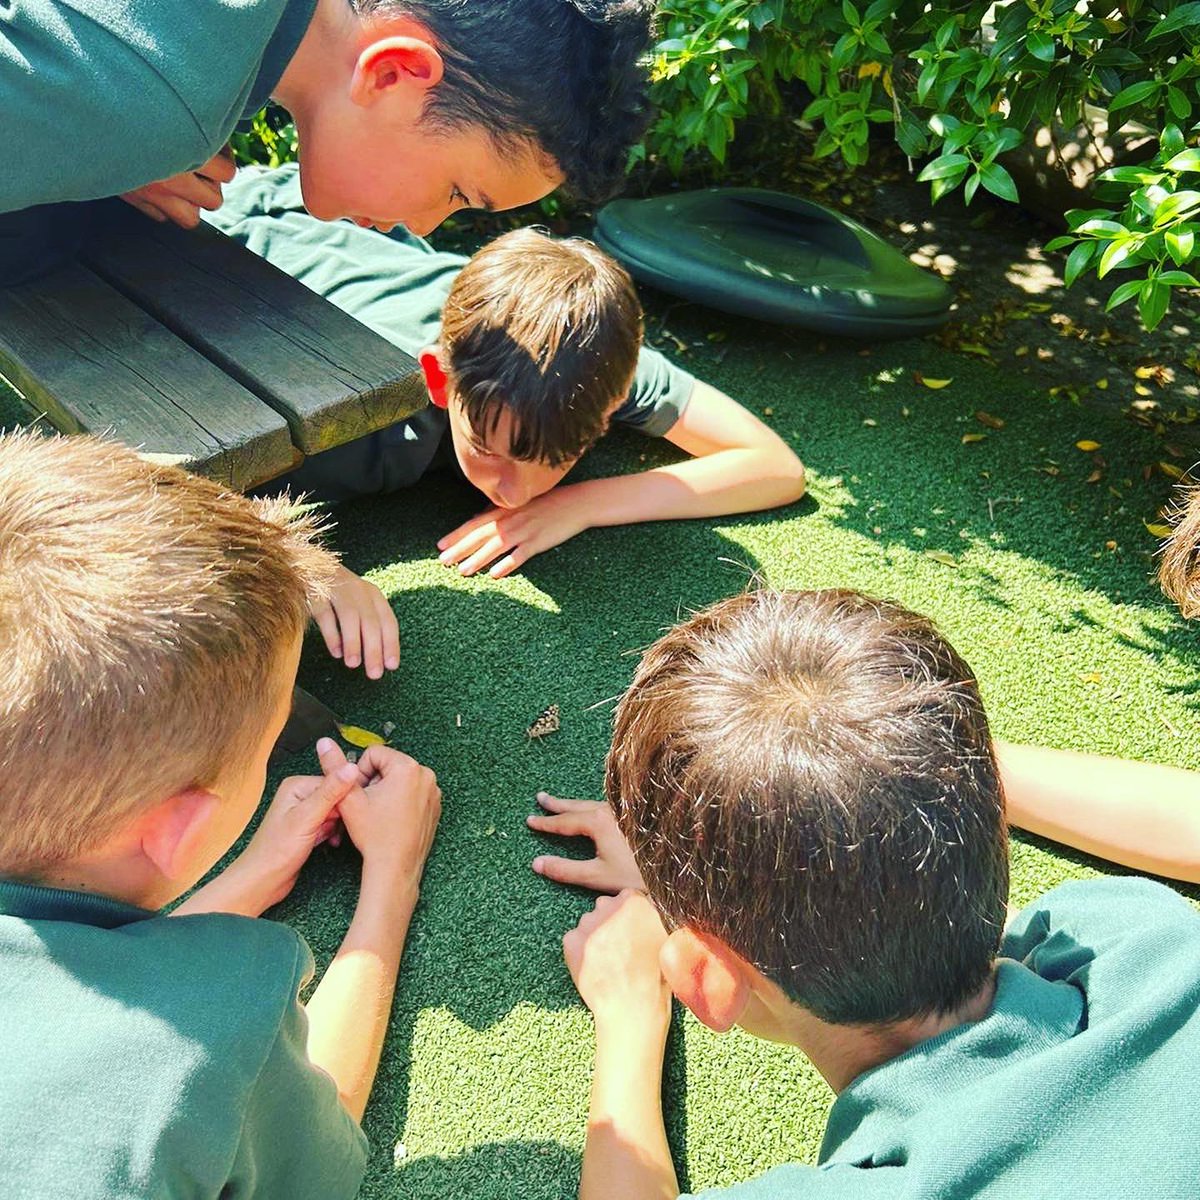 Year 5 have been studying the life cycle of butterflies over the last 6 weeks and today it was time to set them free! #year5science #butterflylifecycle #freetofly🦋 #prepschoollife #arnoldhouseschool